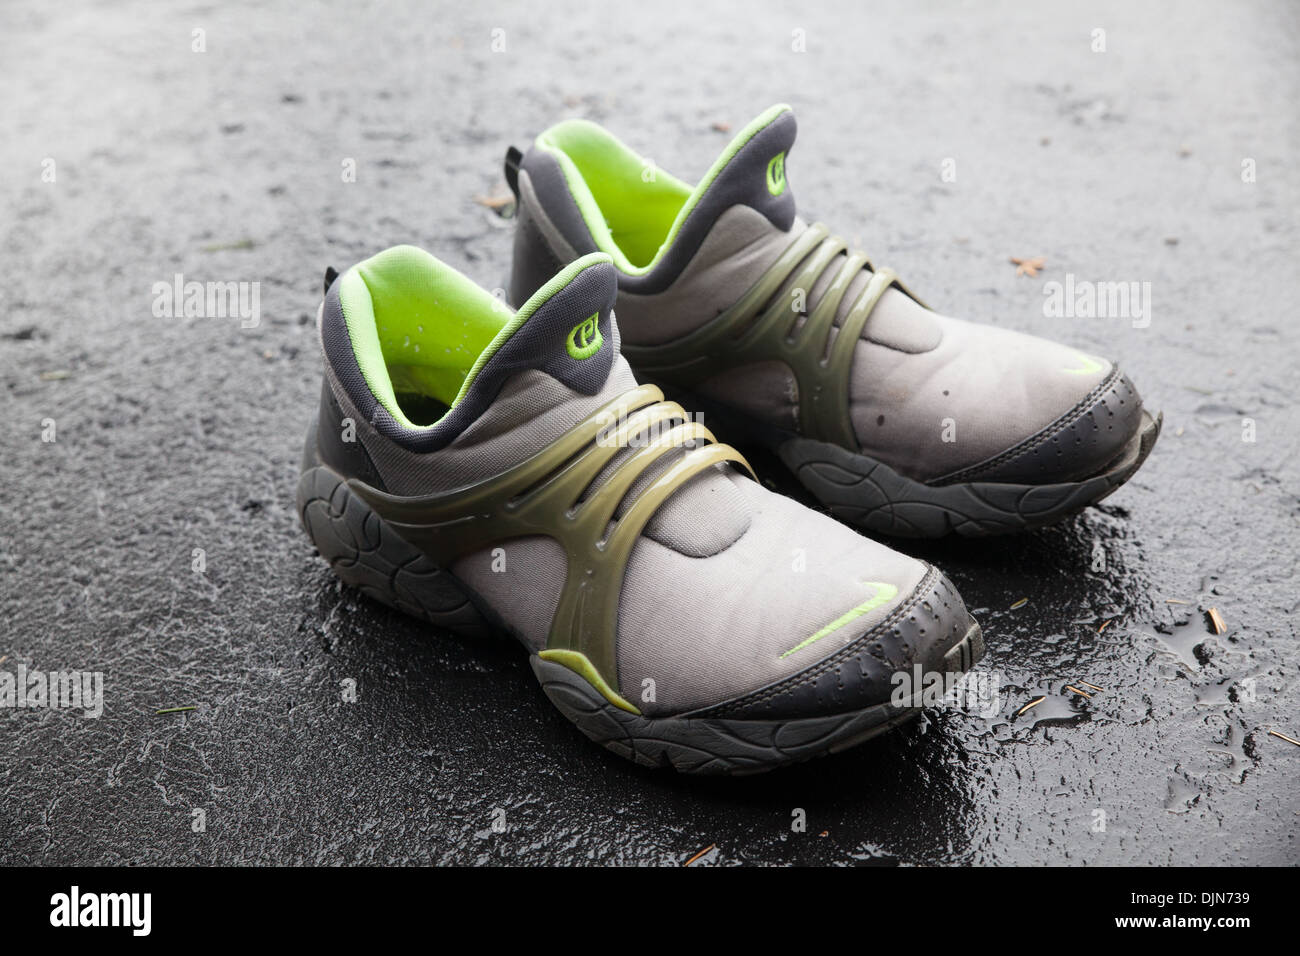 A pair of casual walking shoes on an asphalt road Stock Photo